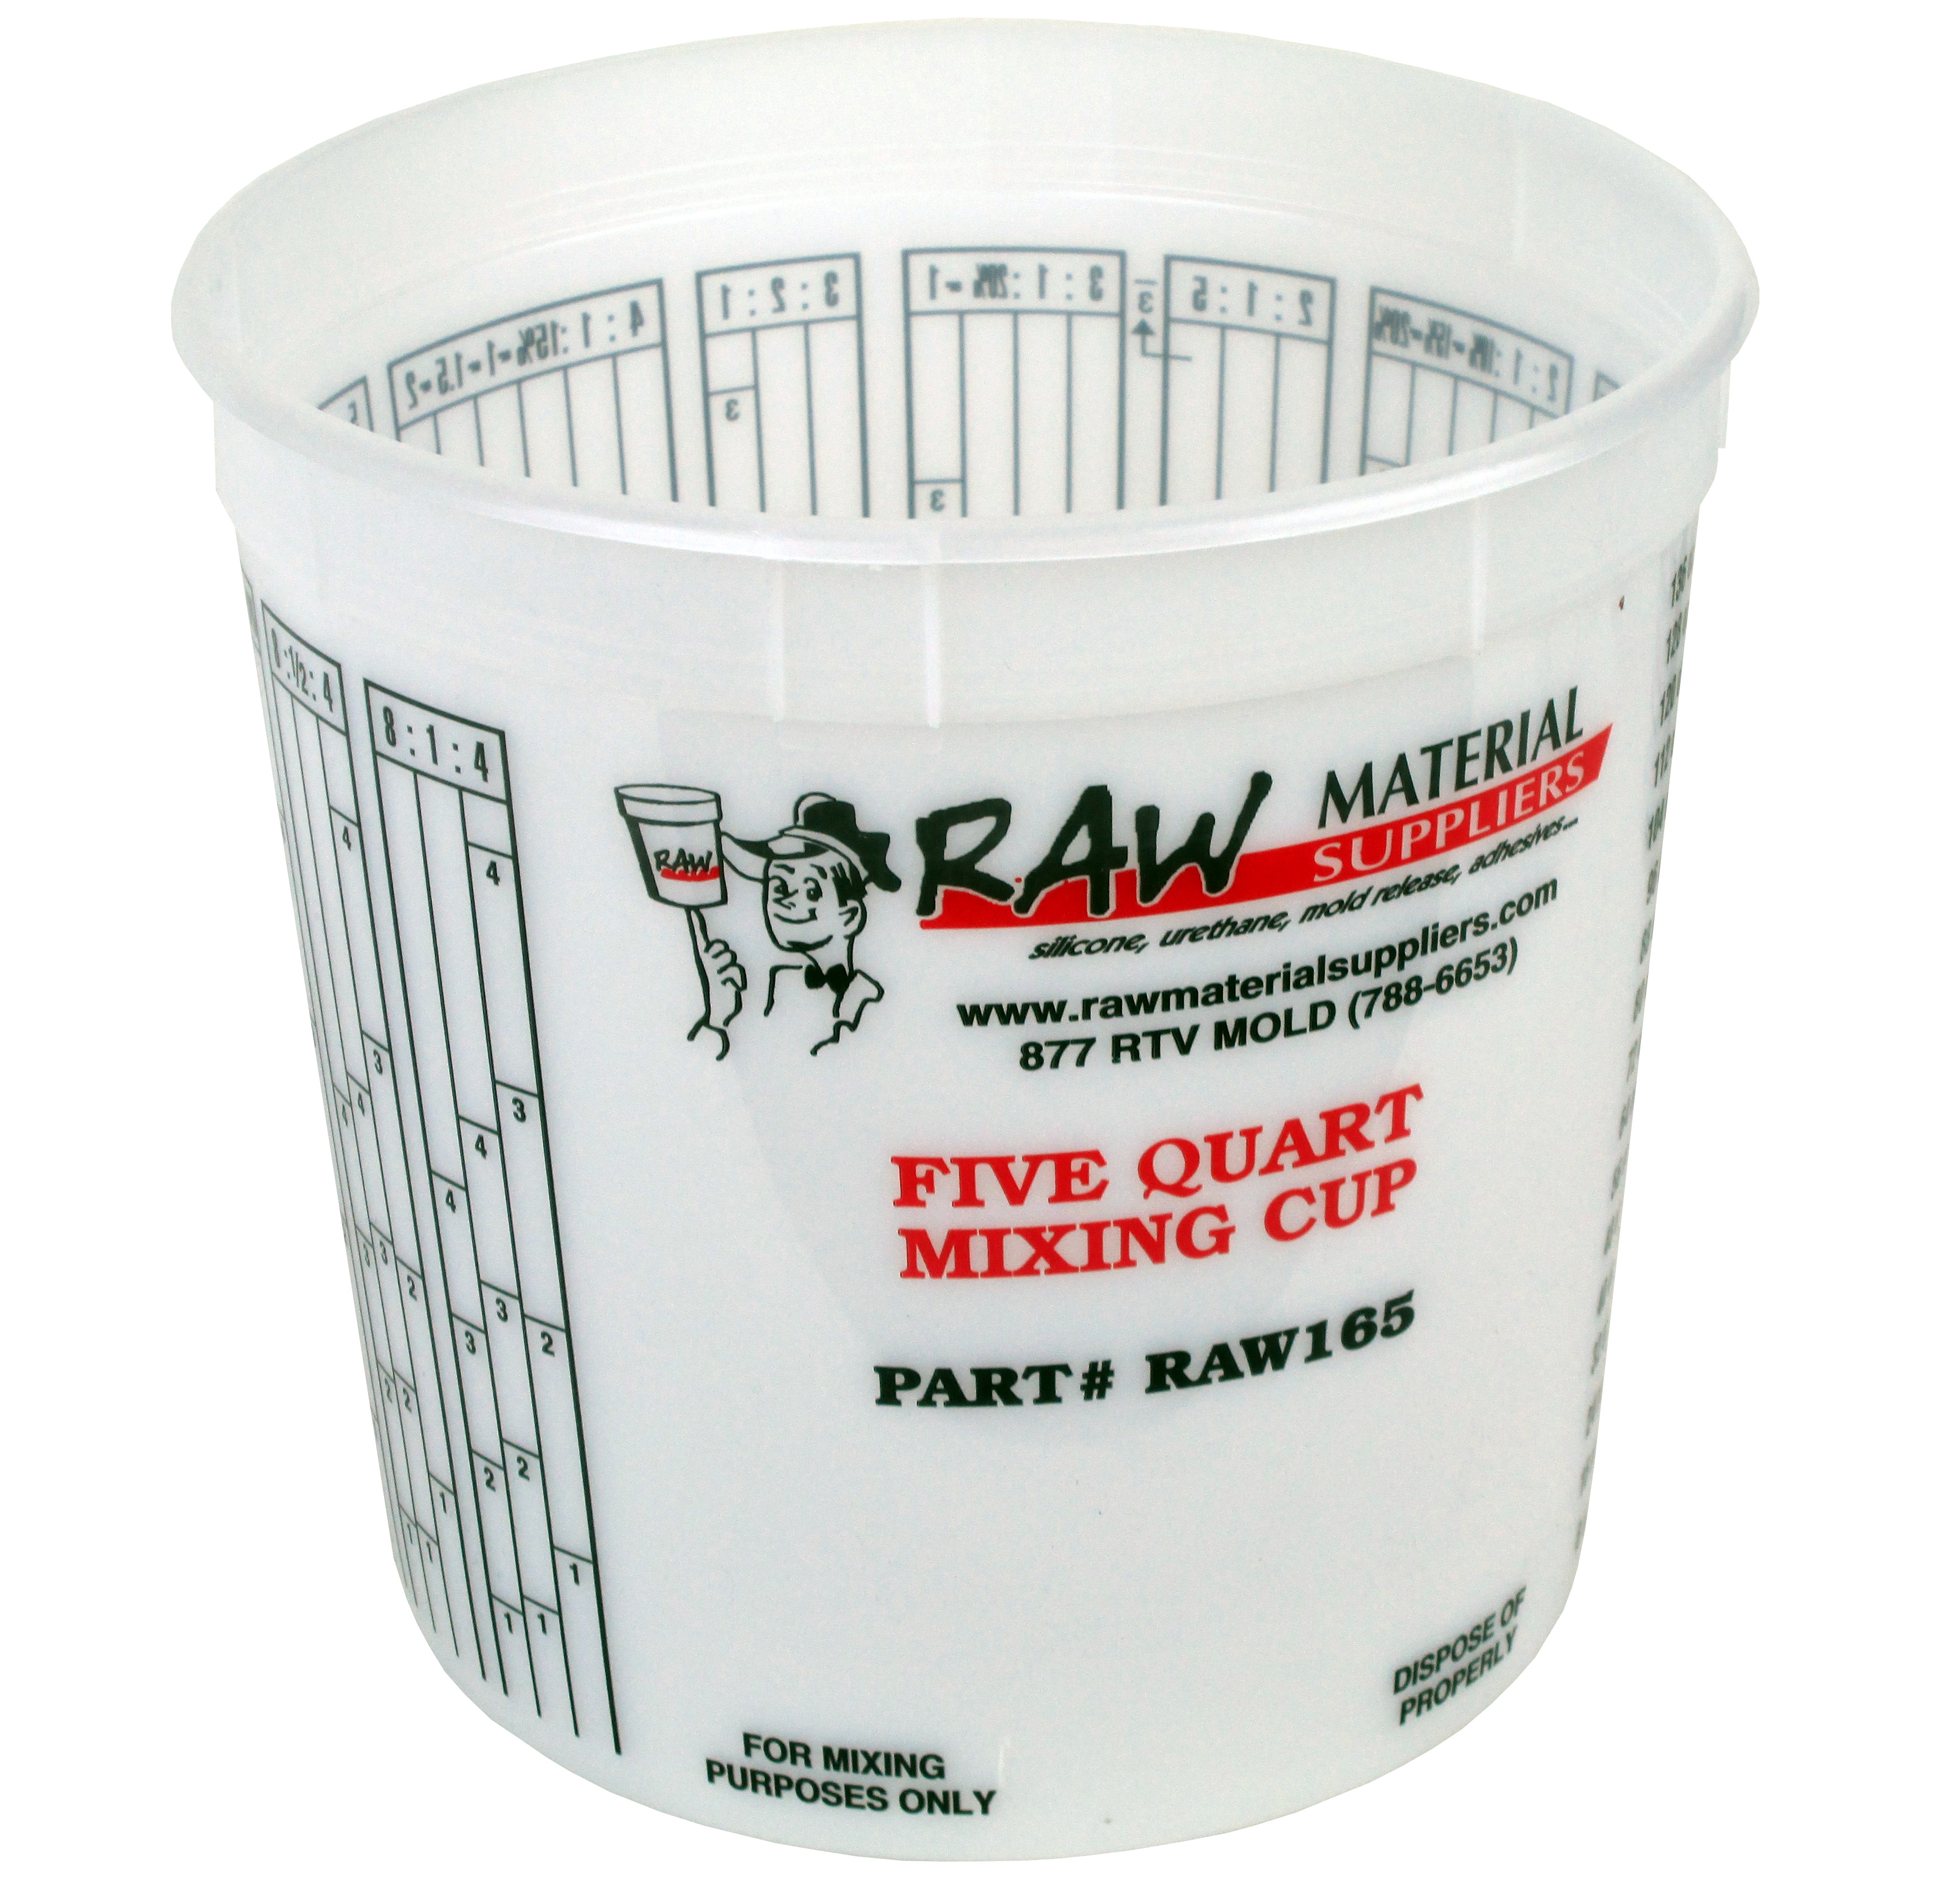 Mixing Cup 2.5 Quart cups - Raw Material Suppliers